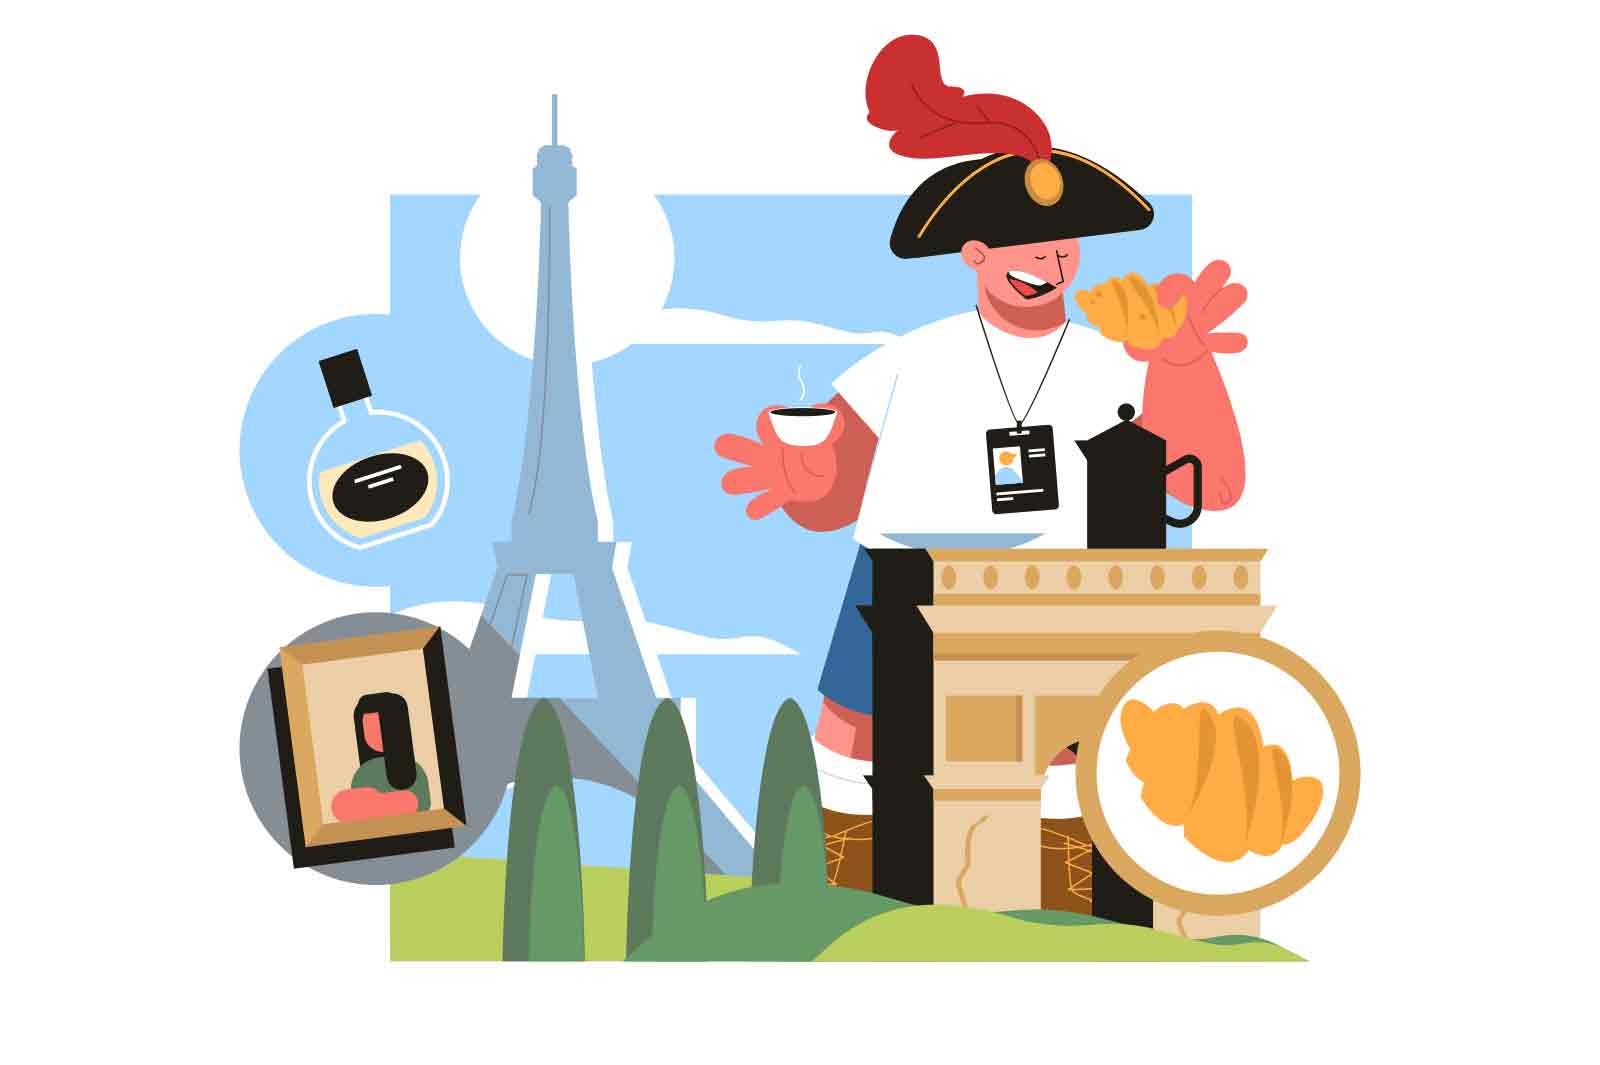 Paris famous travel landmark buildings and architecture sightseeing vector illustration. French culture, fashion, cuisine and national symbols